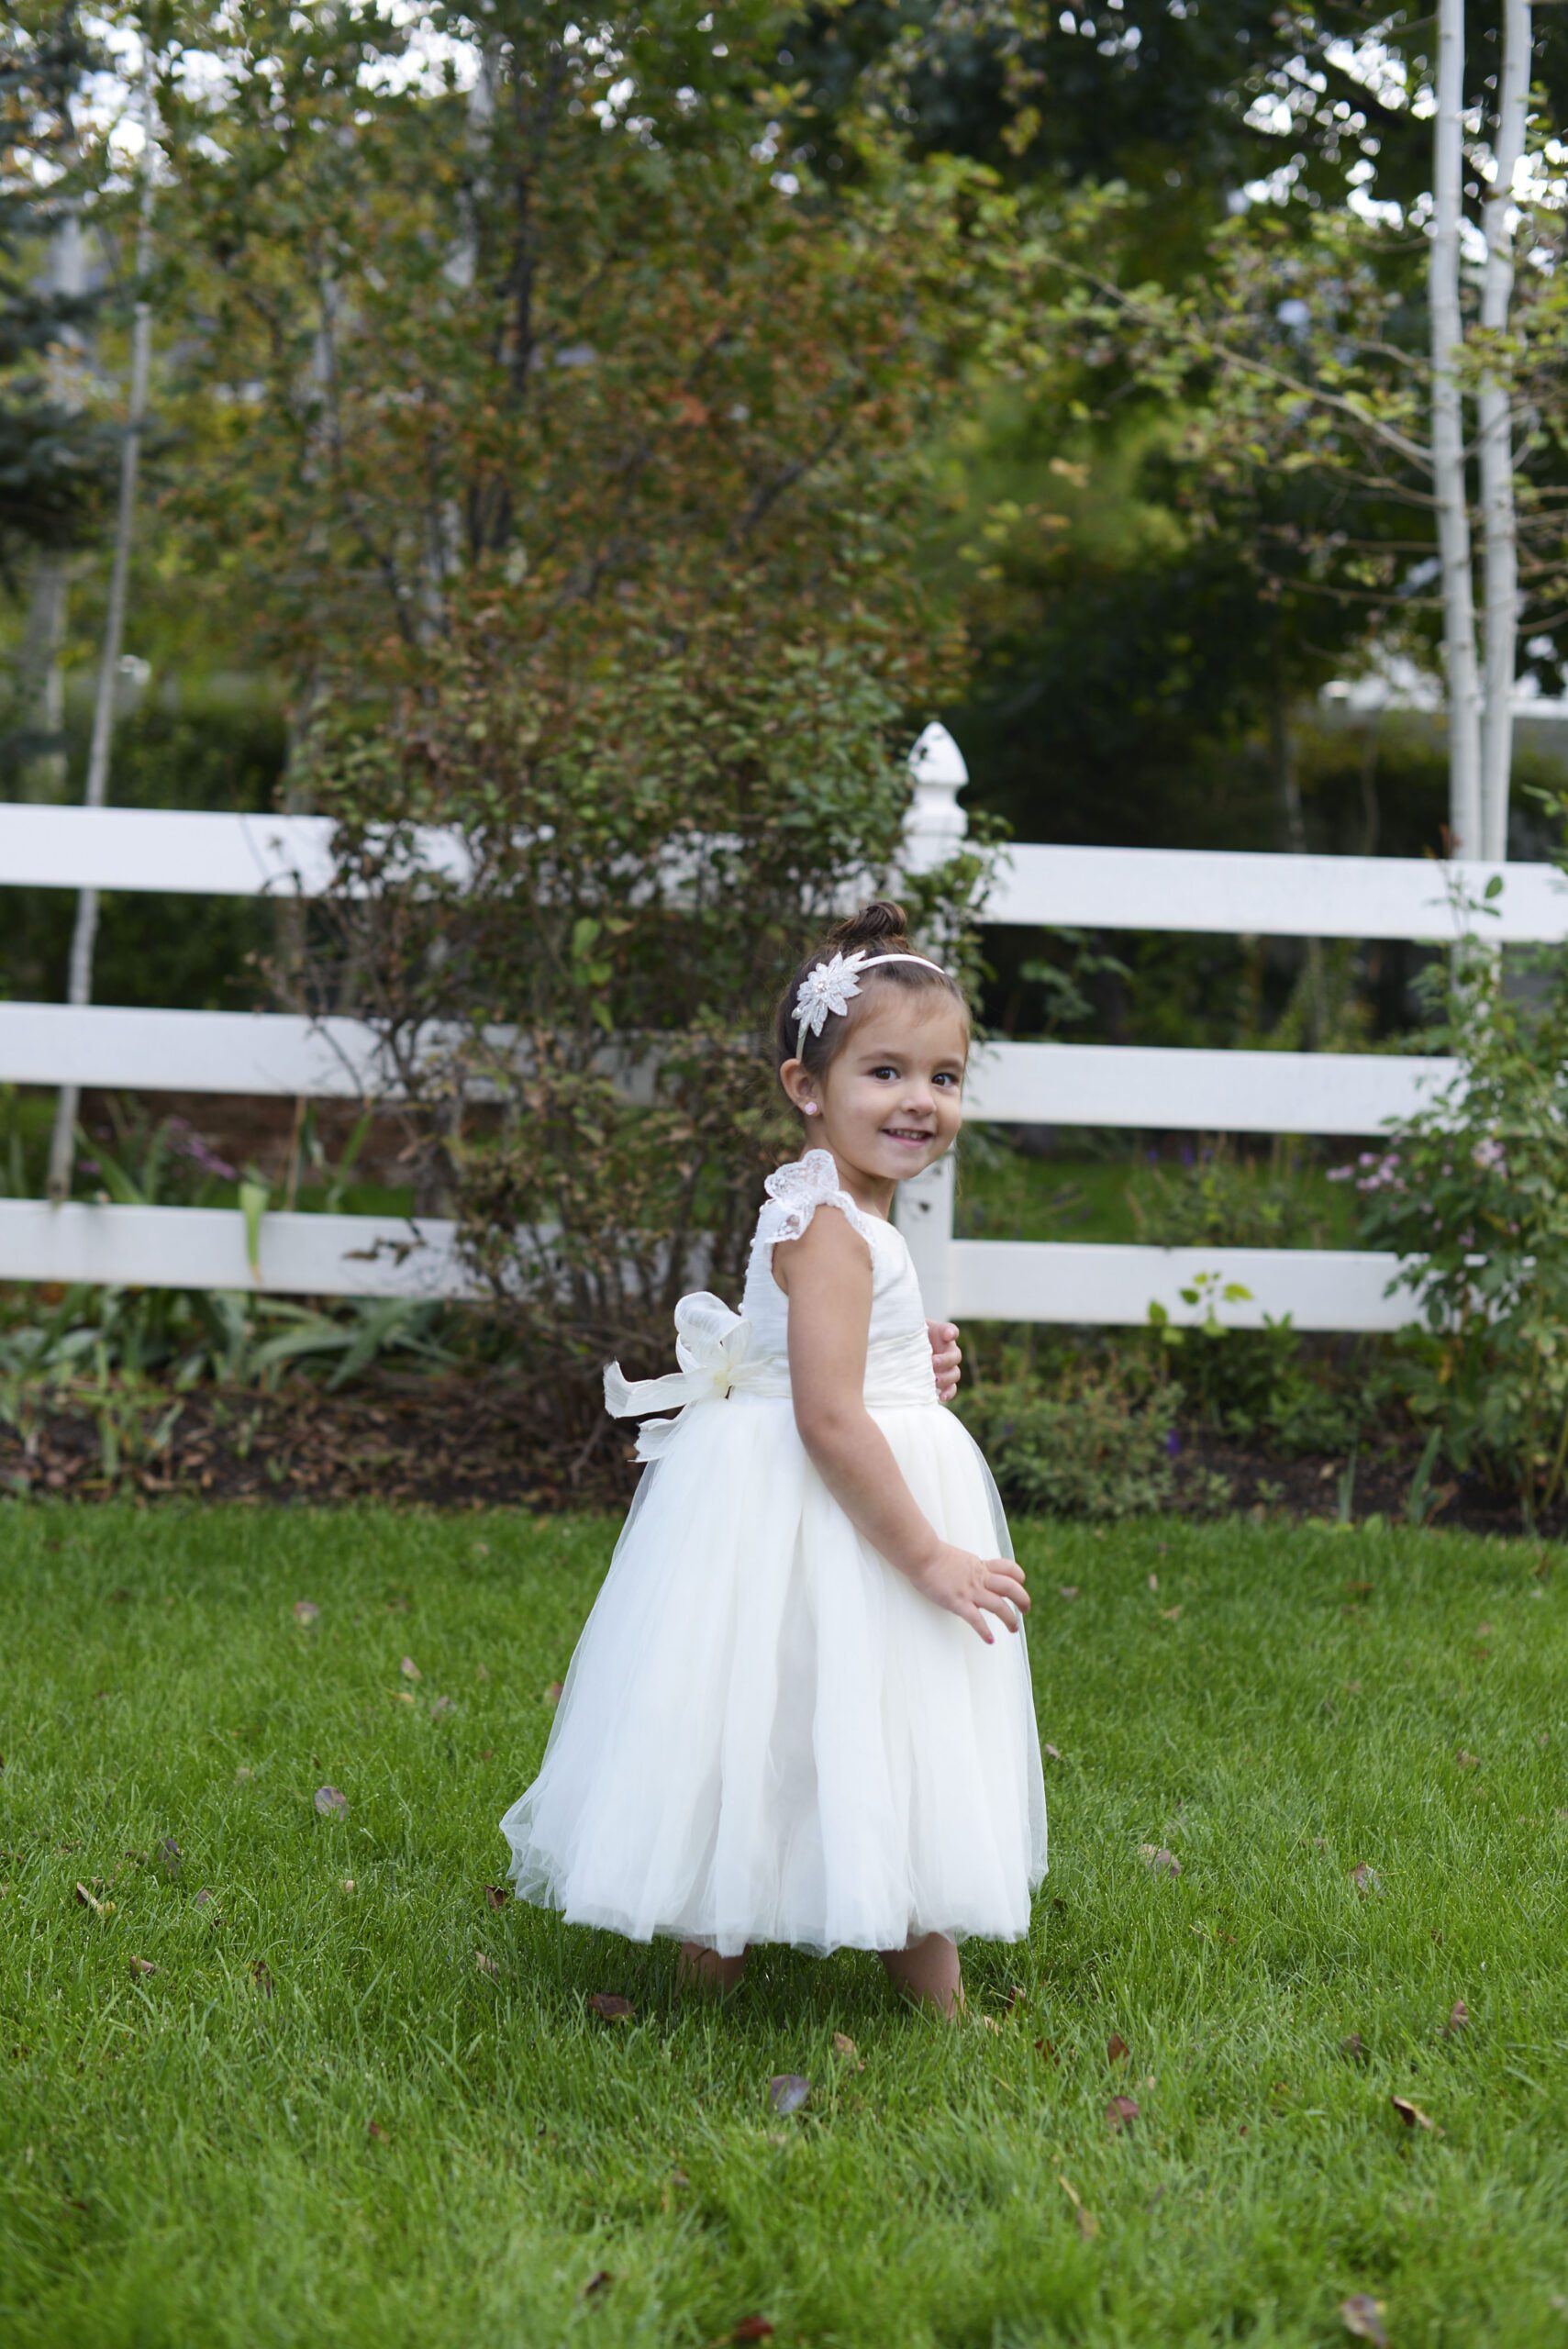 A photo of a girl wearing an ivory lace flower girl dress with full tulle skirt and a star diamante headband